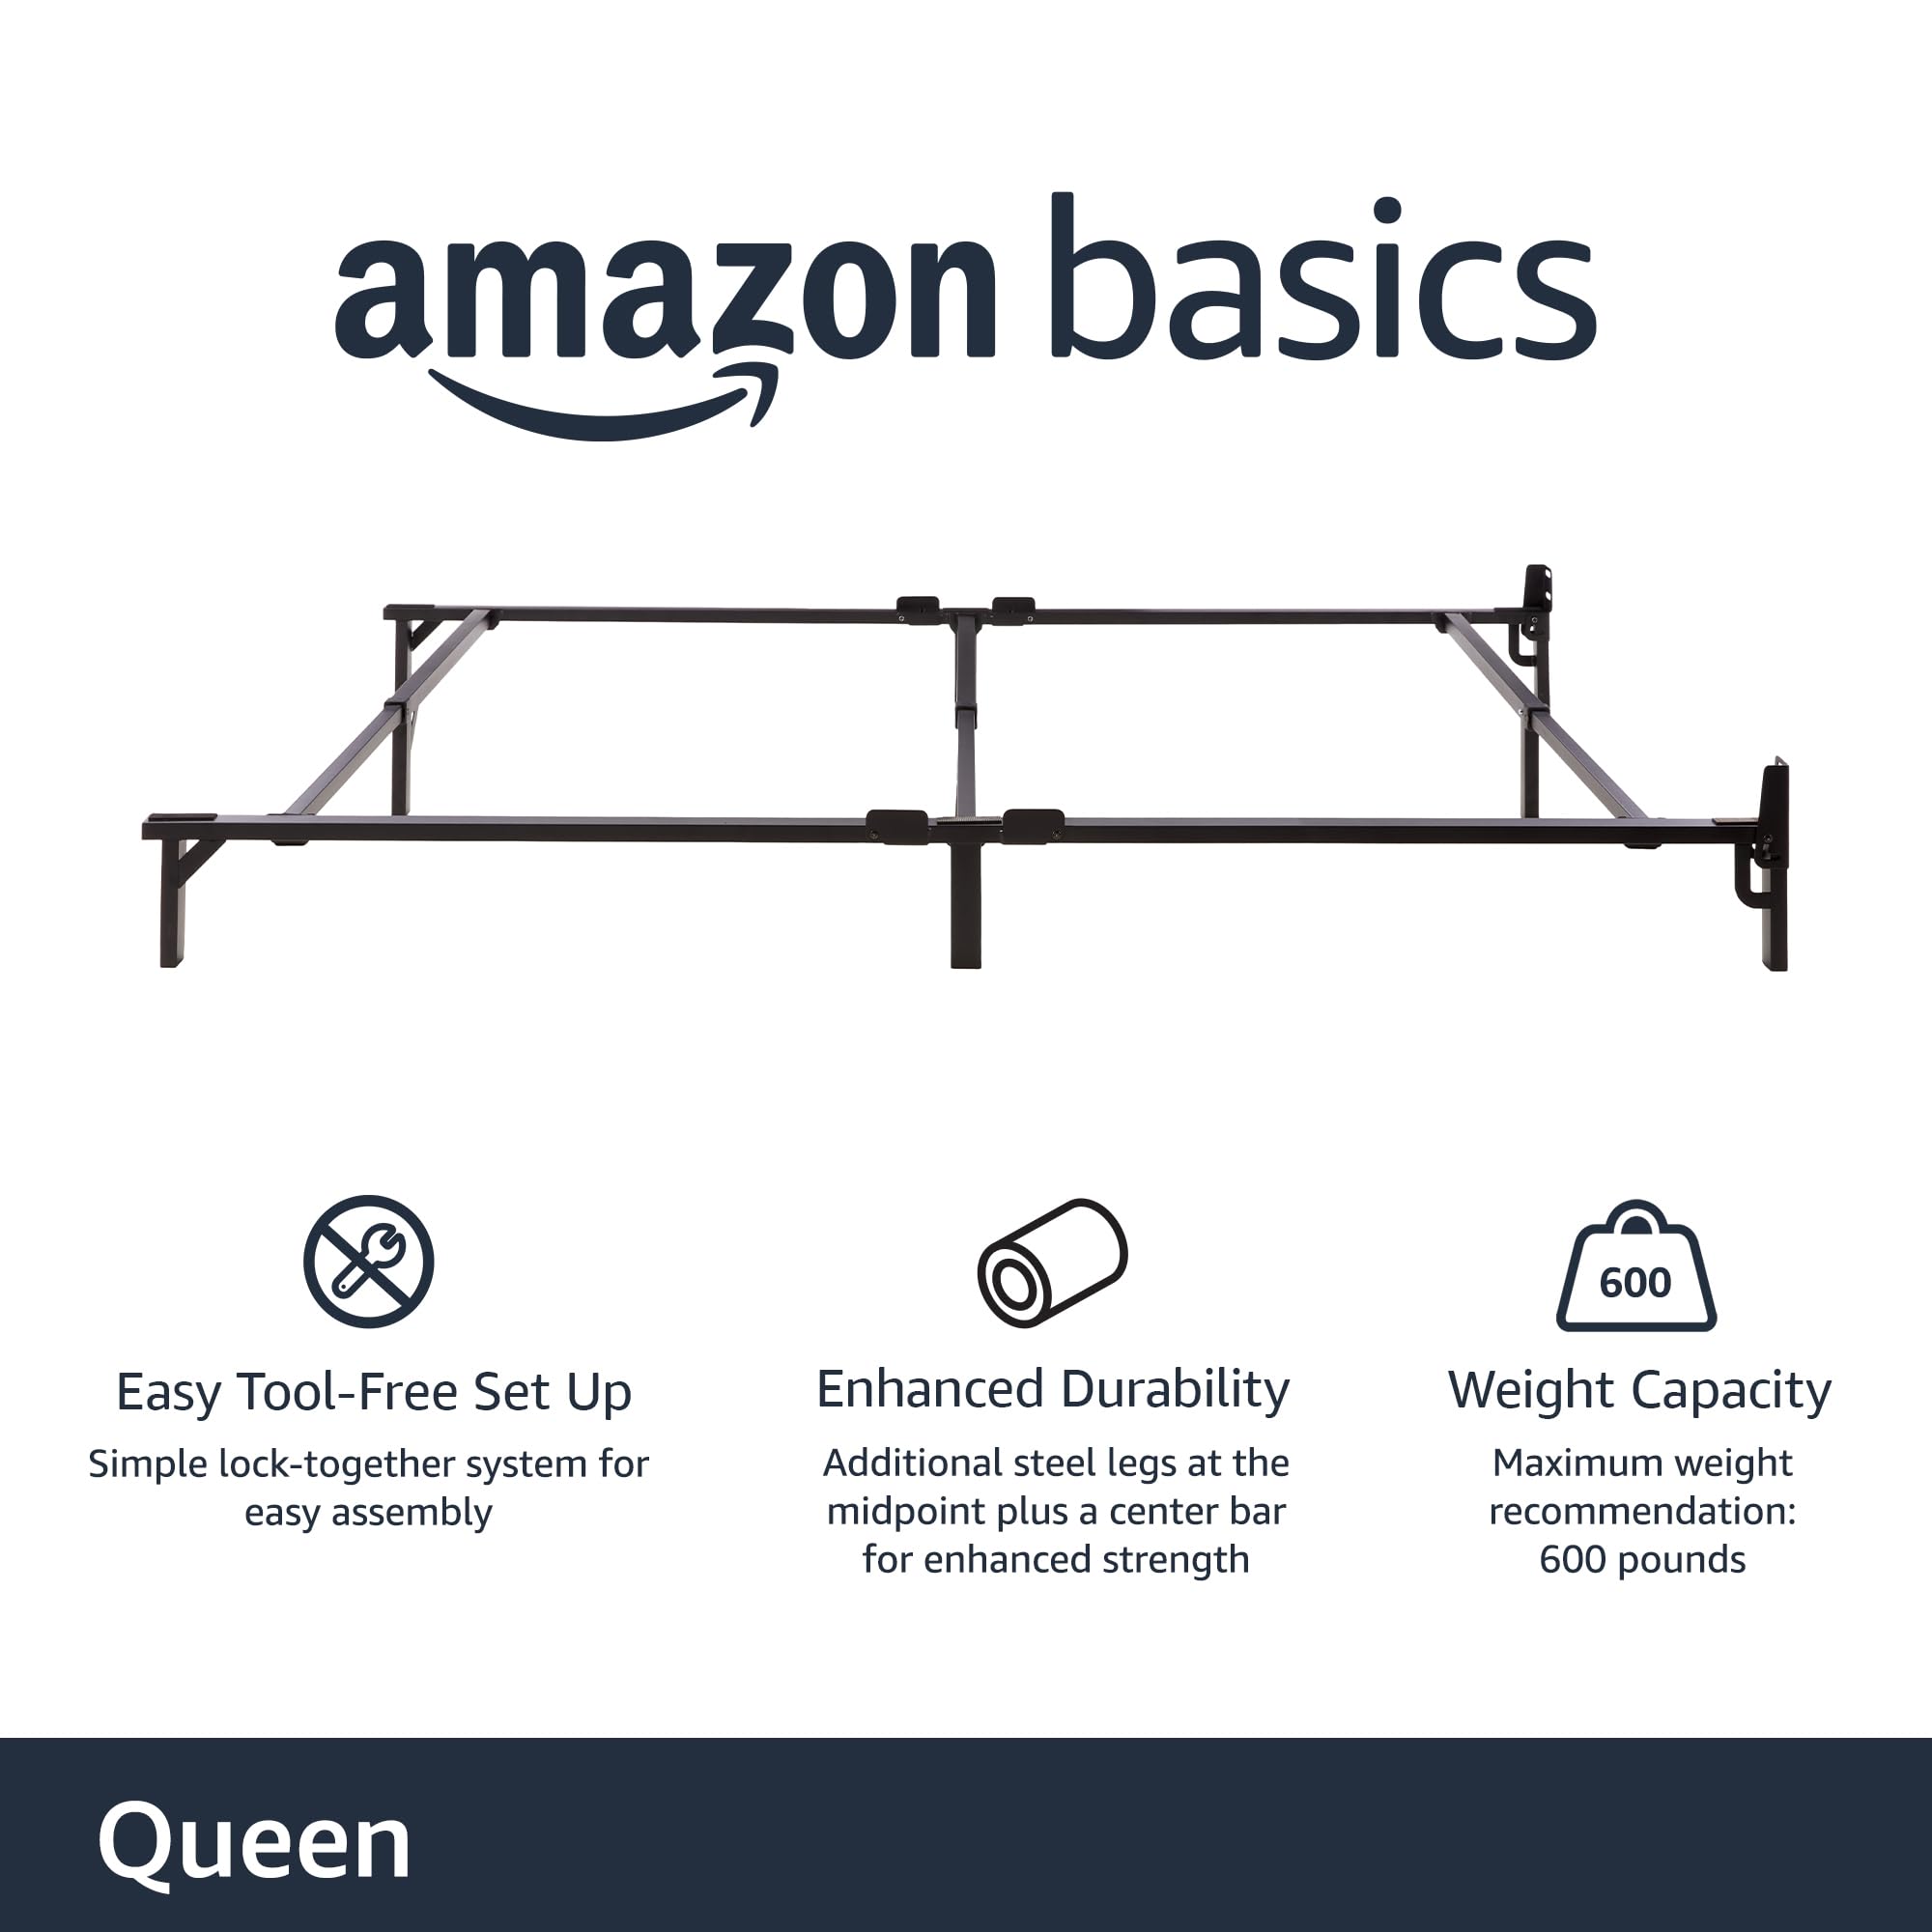 Amazon Basics Metal Bed Frame, 9-Leg Base for Box Spring and Mattress, Queen, Tool-Free Easy Assembly, 79.5